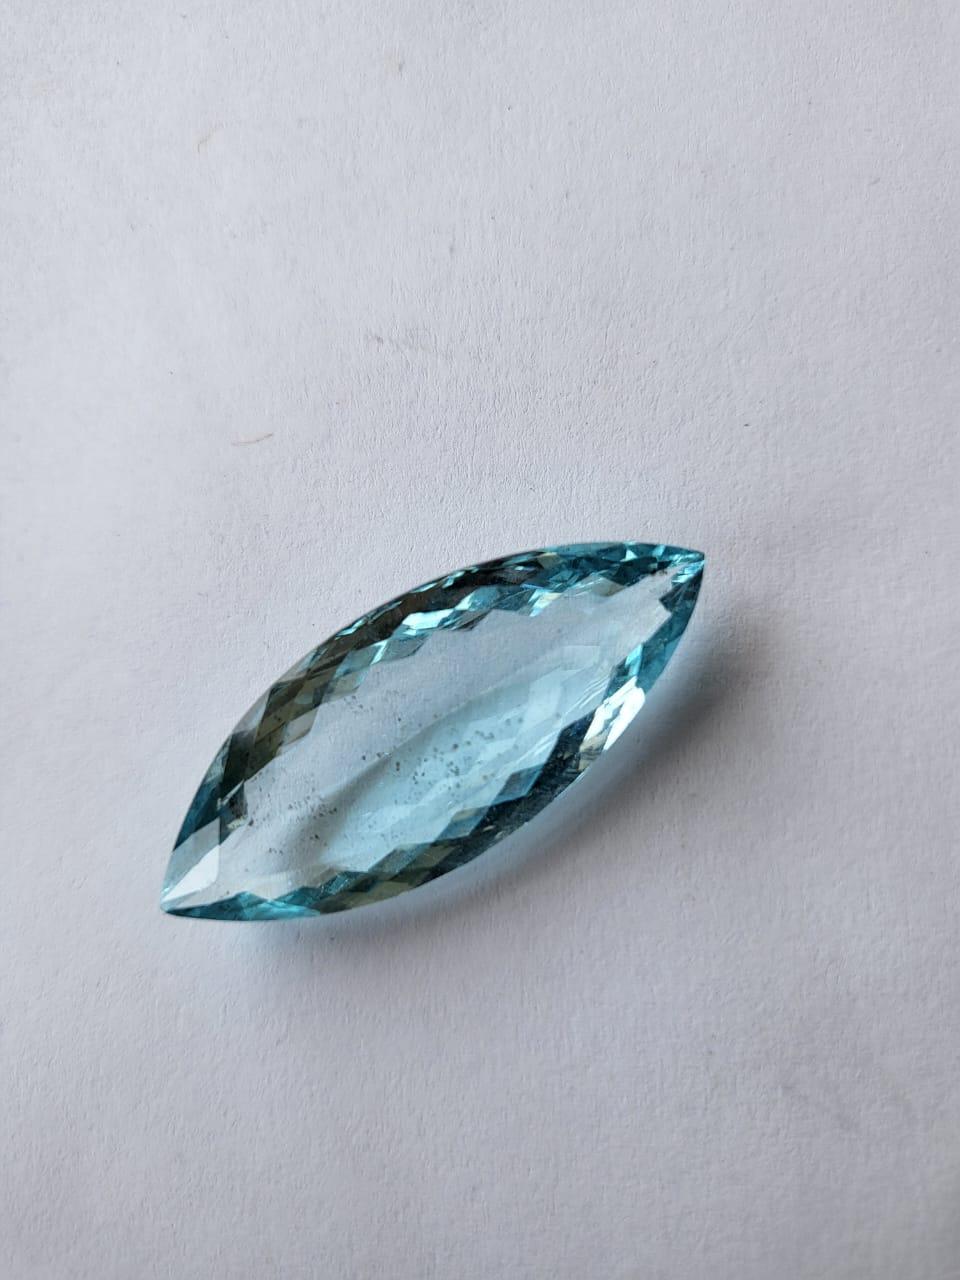 Natural Blue Aquamarine Gemstone.
29.29 Carat with a elegant blue color and excellent clarity. Also has an excellent fancy Marquise cut with ideal polish to show great shine and color . It will look authentic in jewellery. The dimensions of the